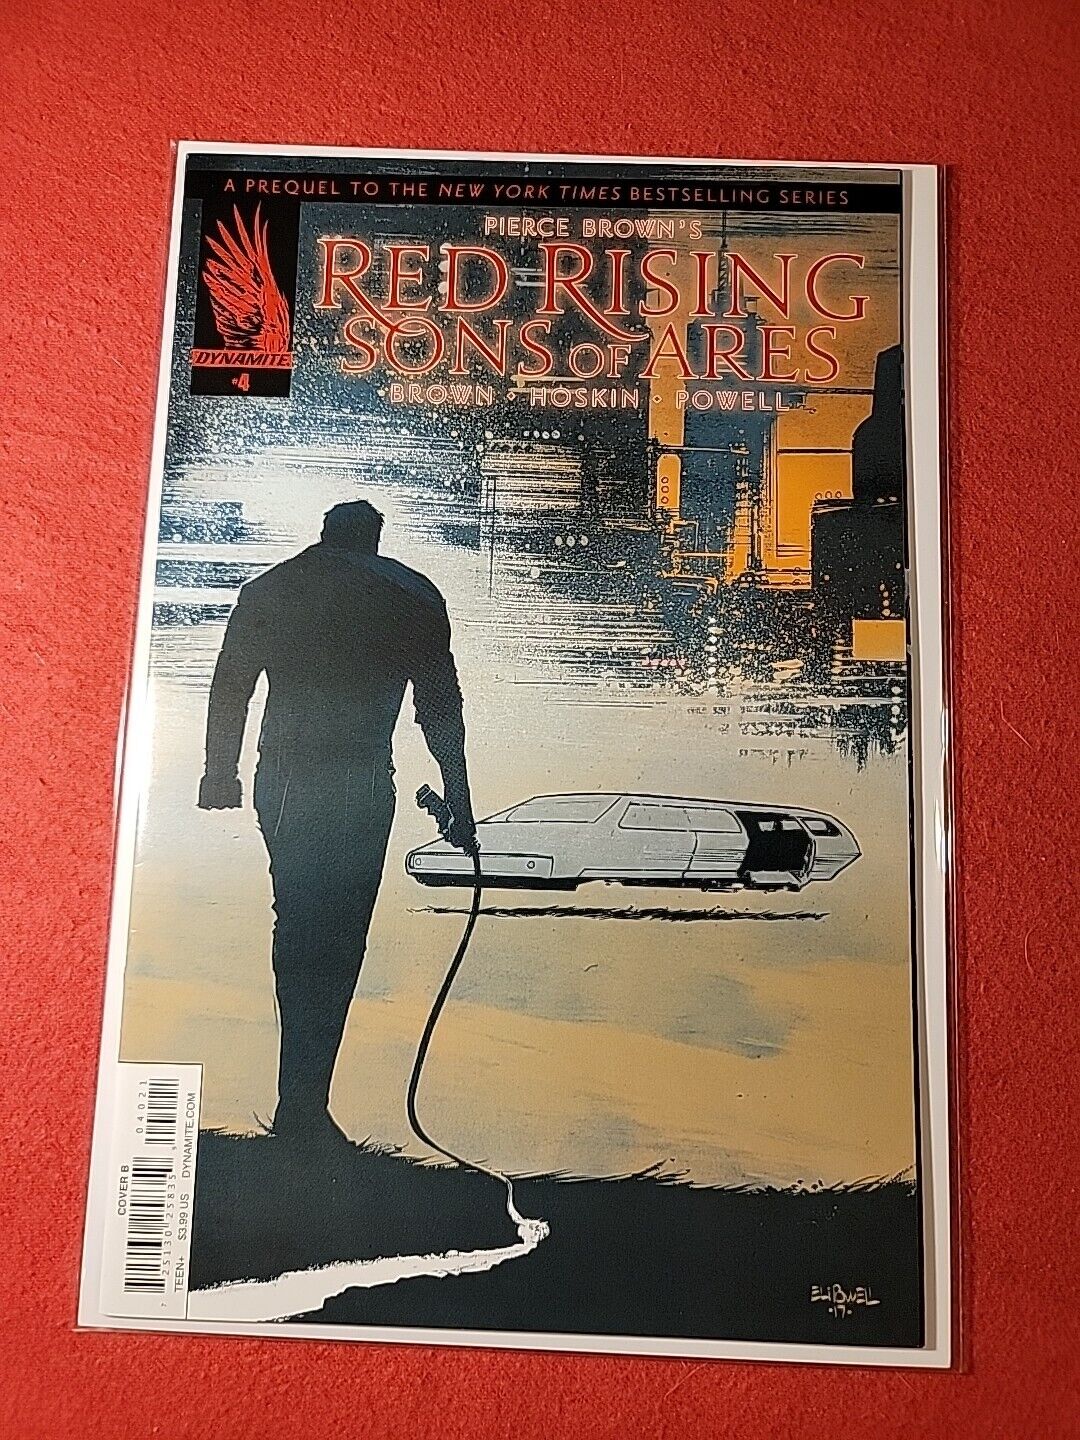 RED RISING SONS OF ARES #4 2017 1ST PRINT COVER B DYNAMITE PIERCE BROWN